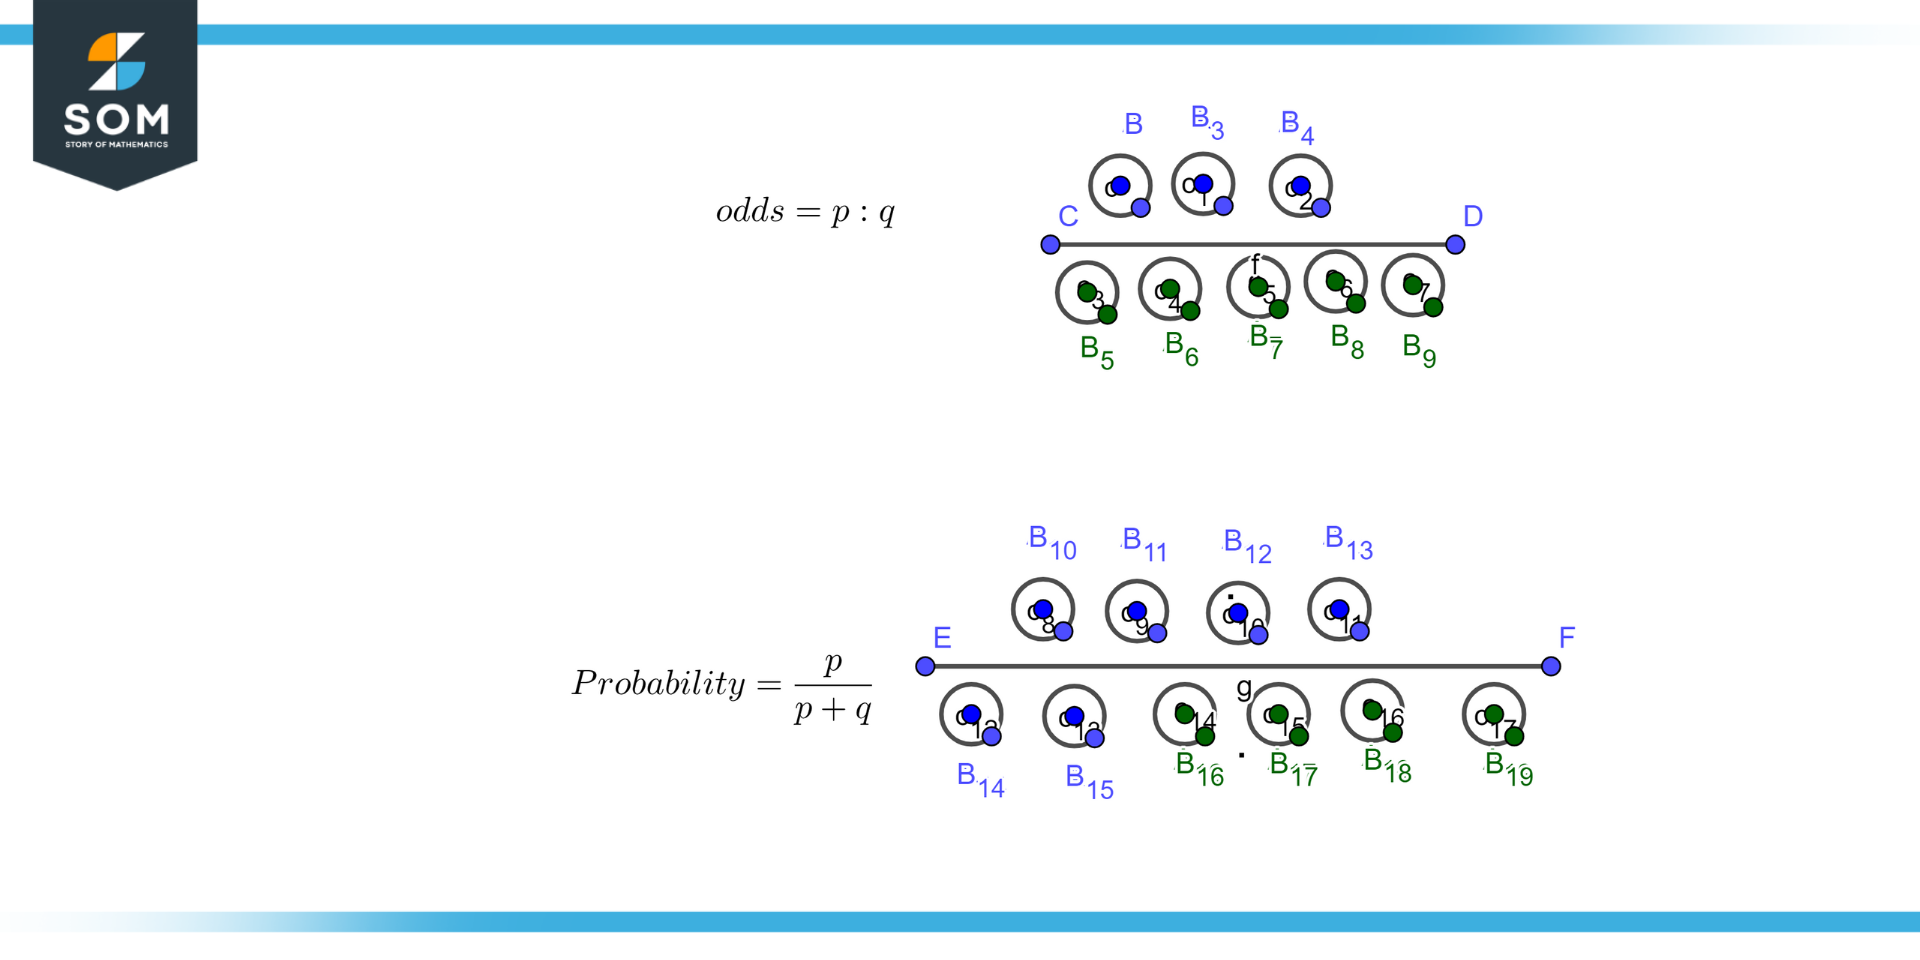 Graphical representation of probability and odds